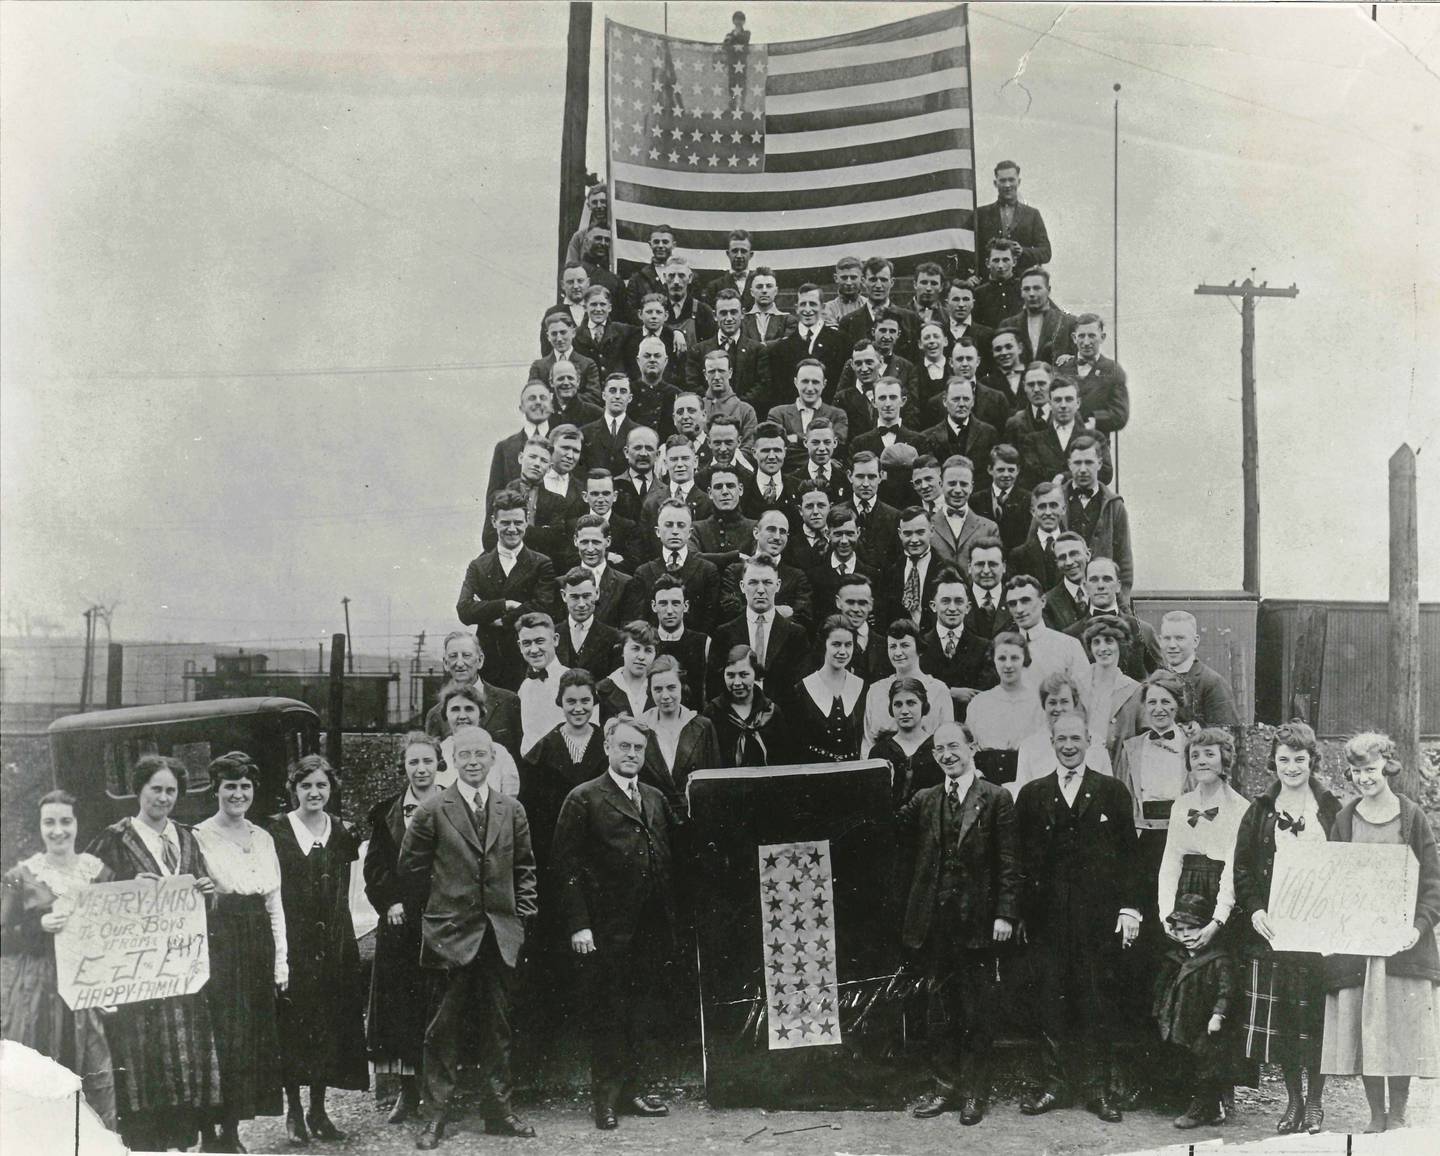 The workers at the E J & E railroad wishing the boys in service a Merry Christmas in 1917.